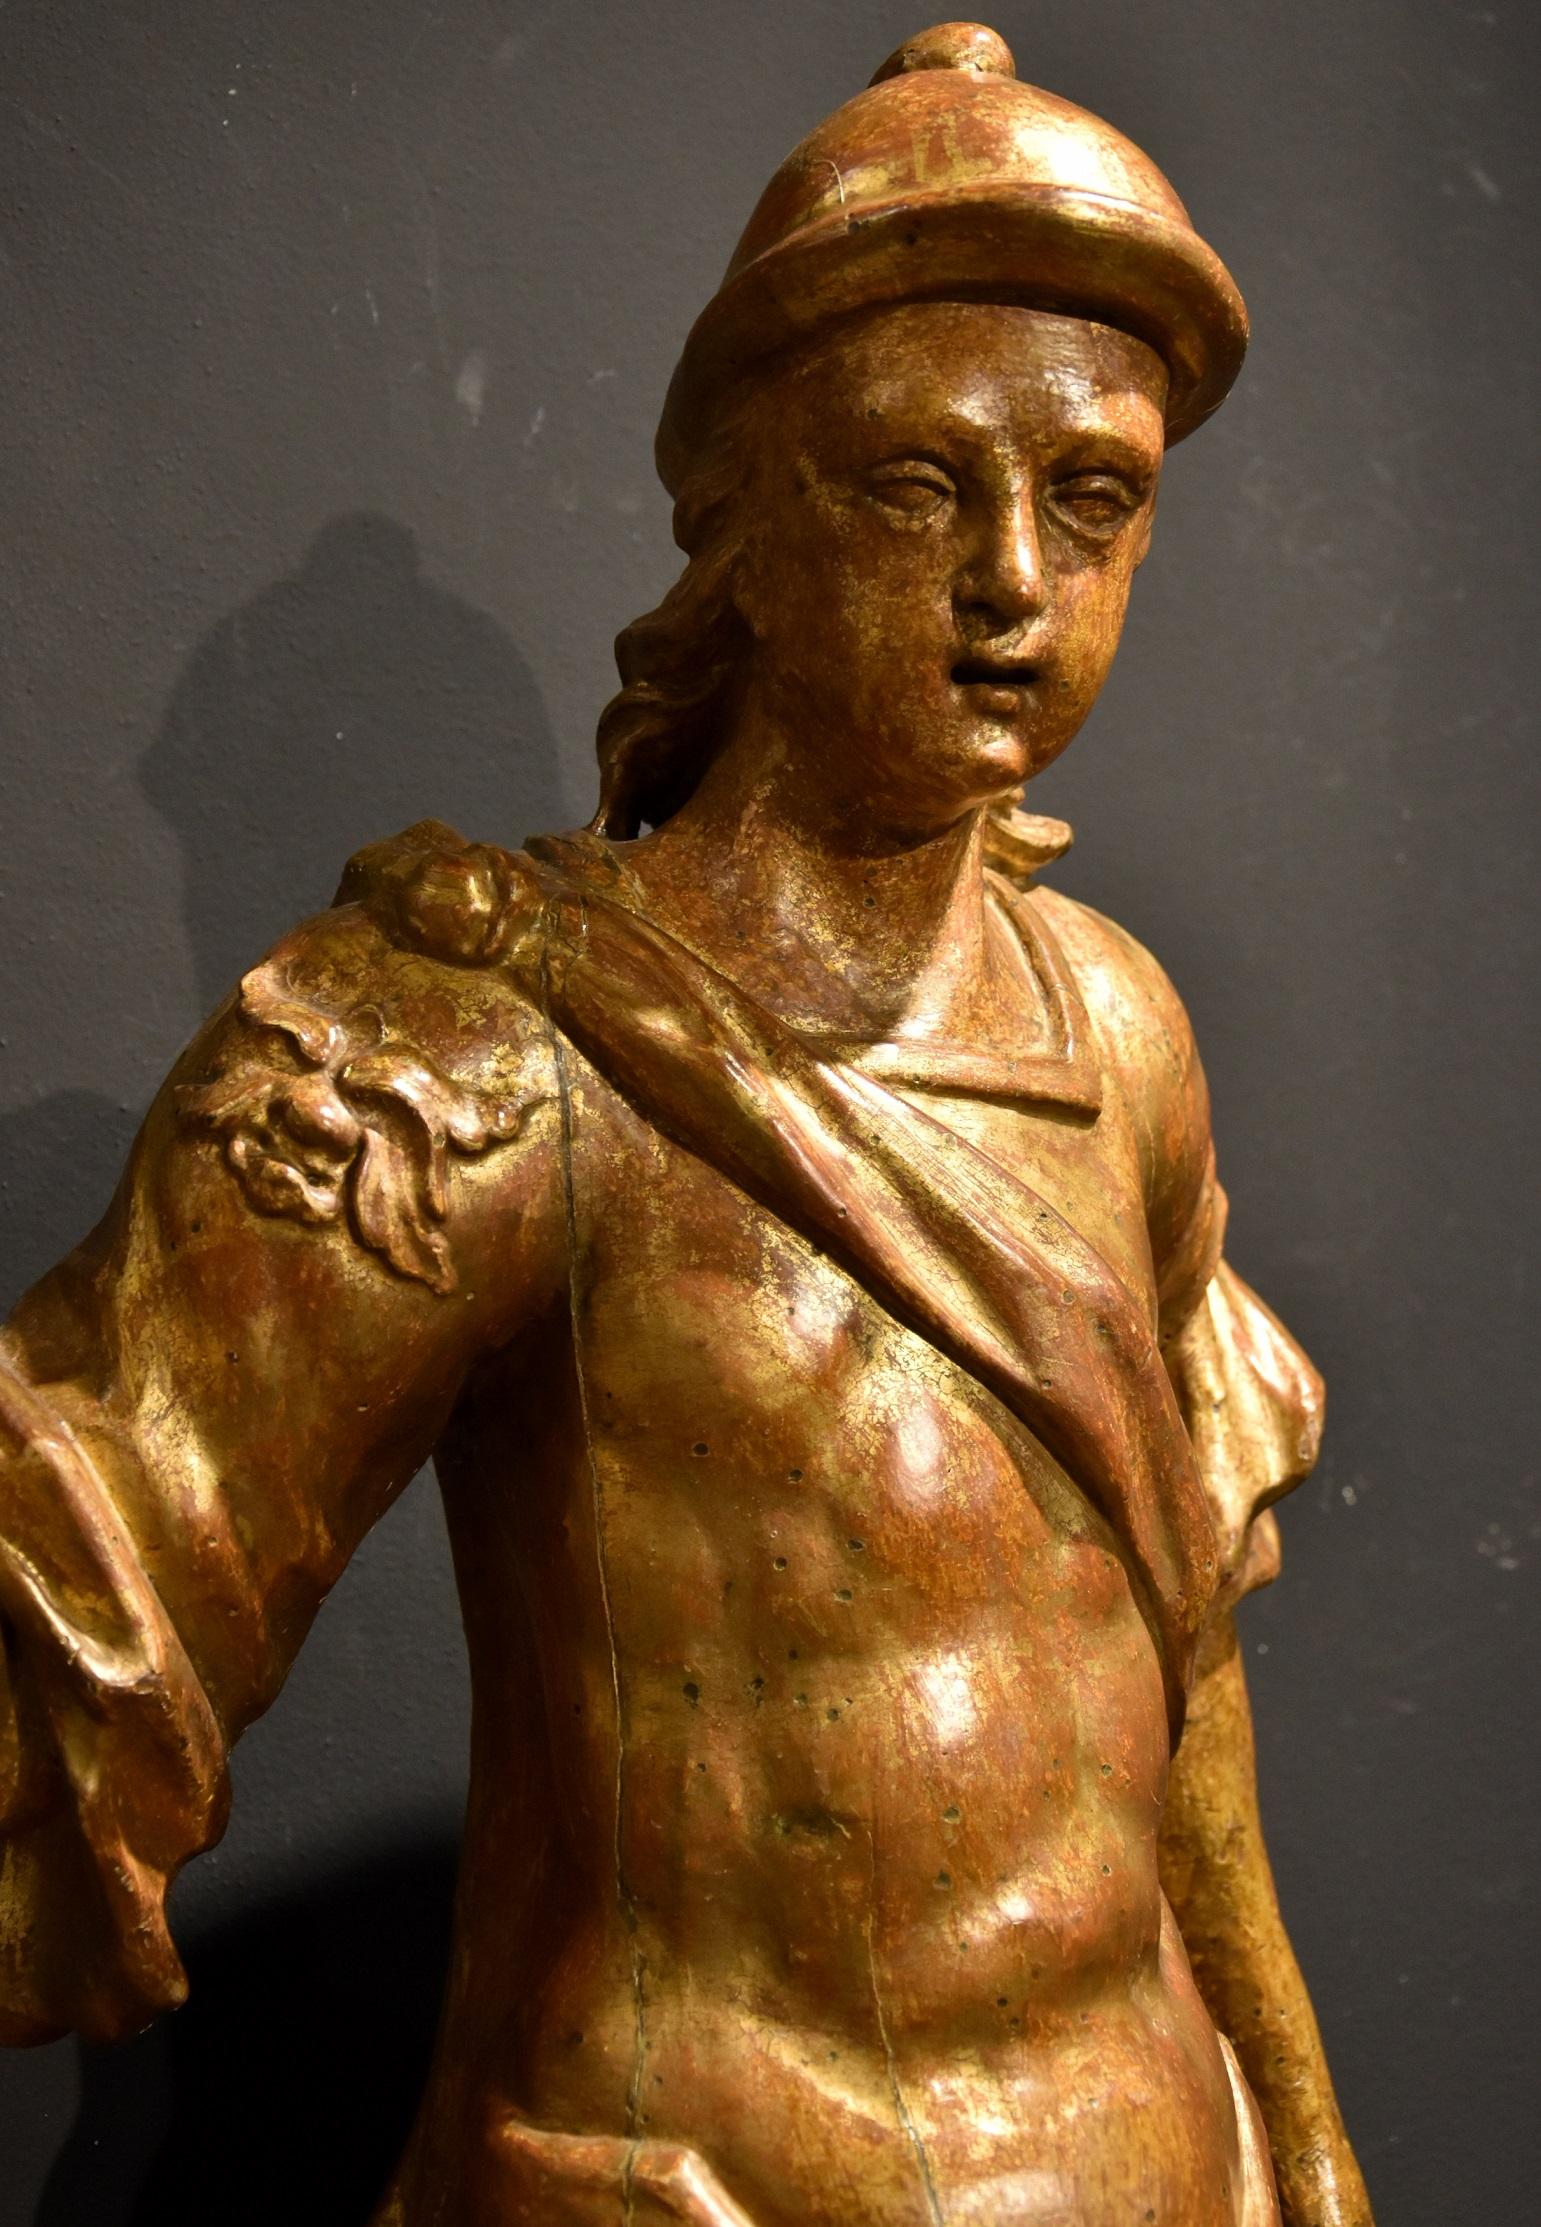 Venetian Baroque sculptor of the 17th century
Full-length wooden sculpture of a Roman soldier

Wood (walnut?) Carved, polychrome and gilded
Dimensions: Total height: 118 cm. - Width: 49 cm.

This valuable seventeenth-century wooden sculpture, which